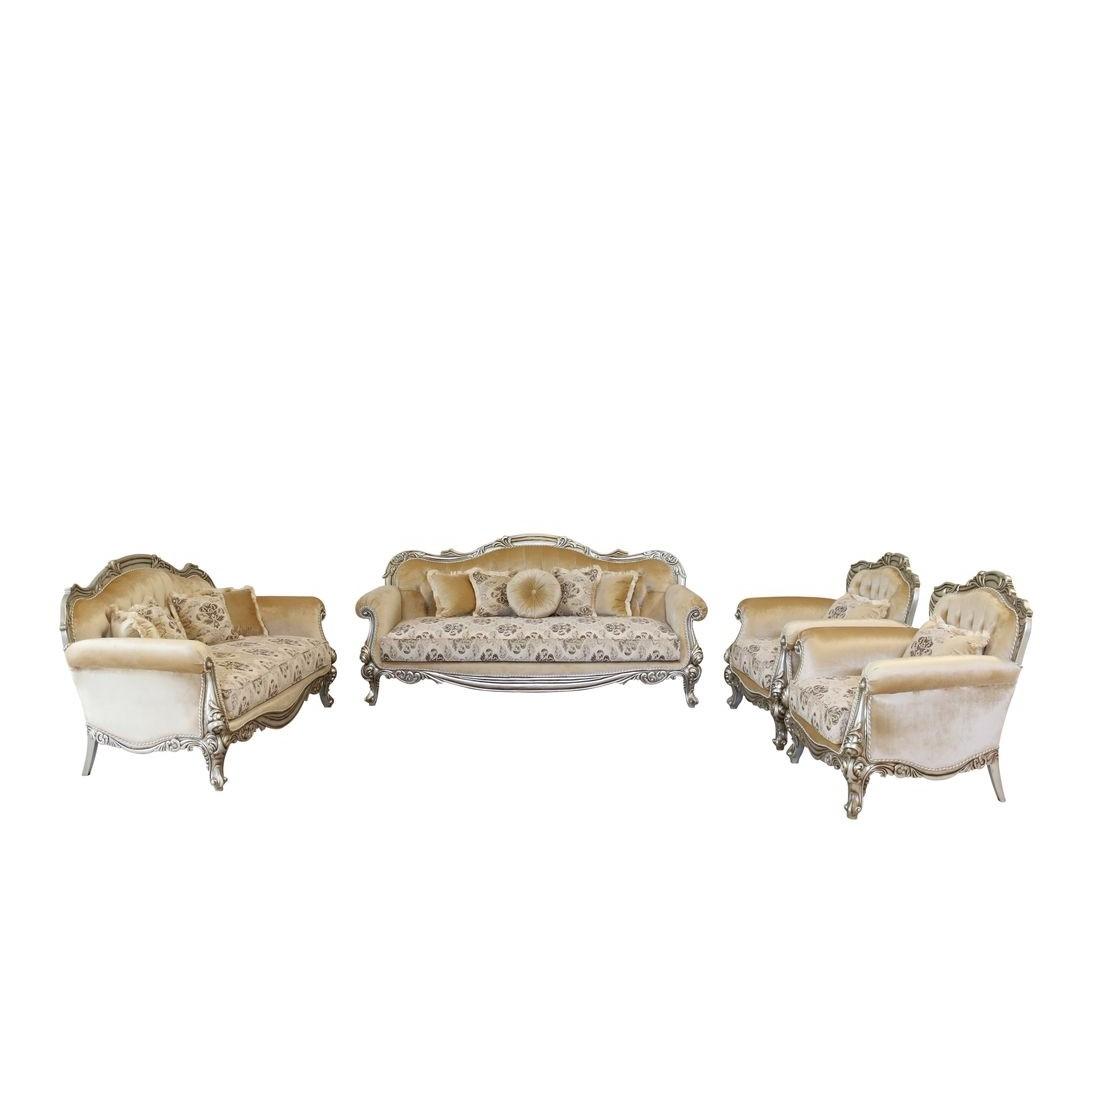 Classic, Traditional Sofa Set SERENA 37055-Set-4 in Antique, Silver Fabric